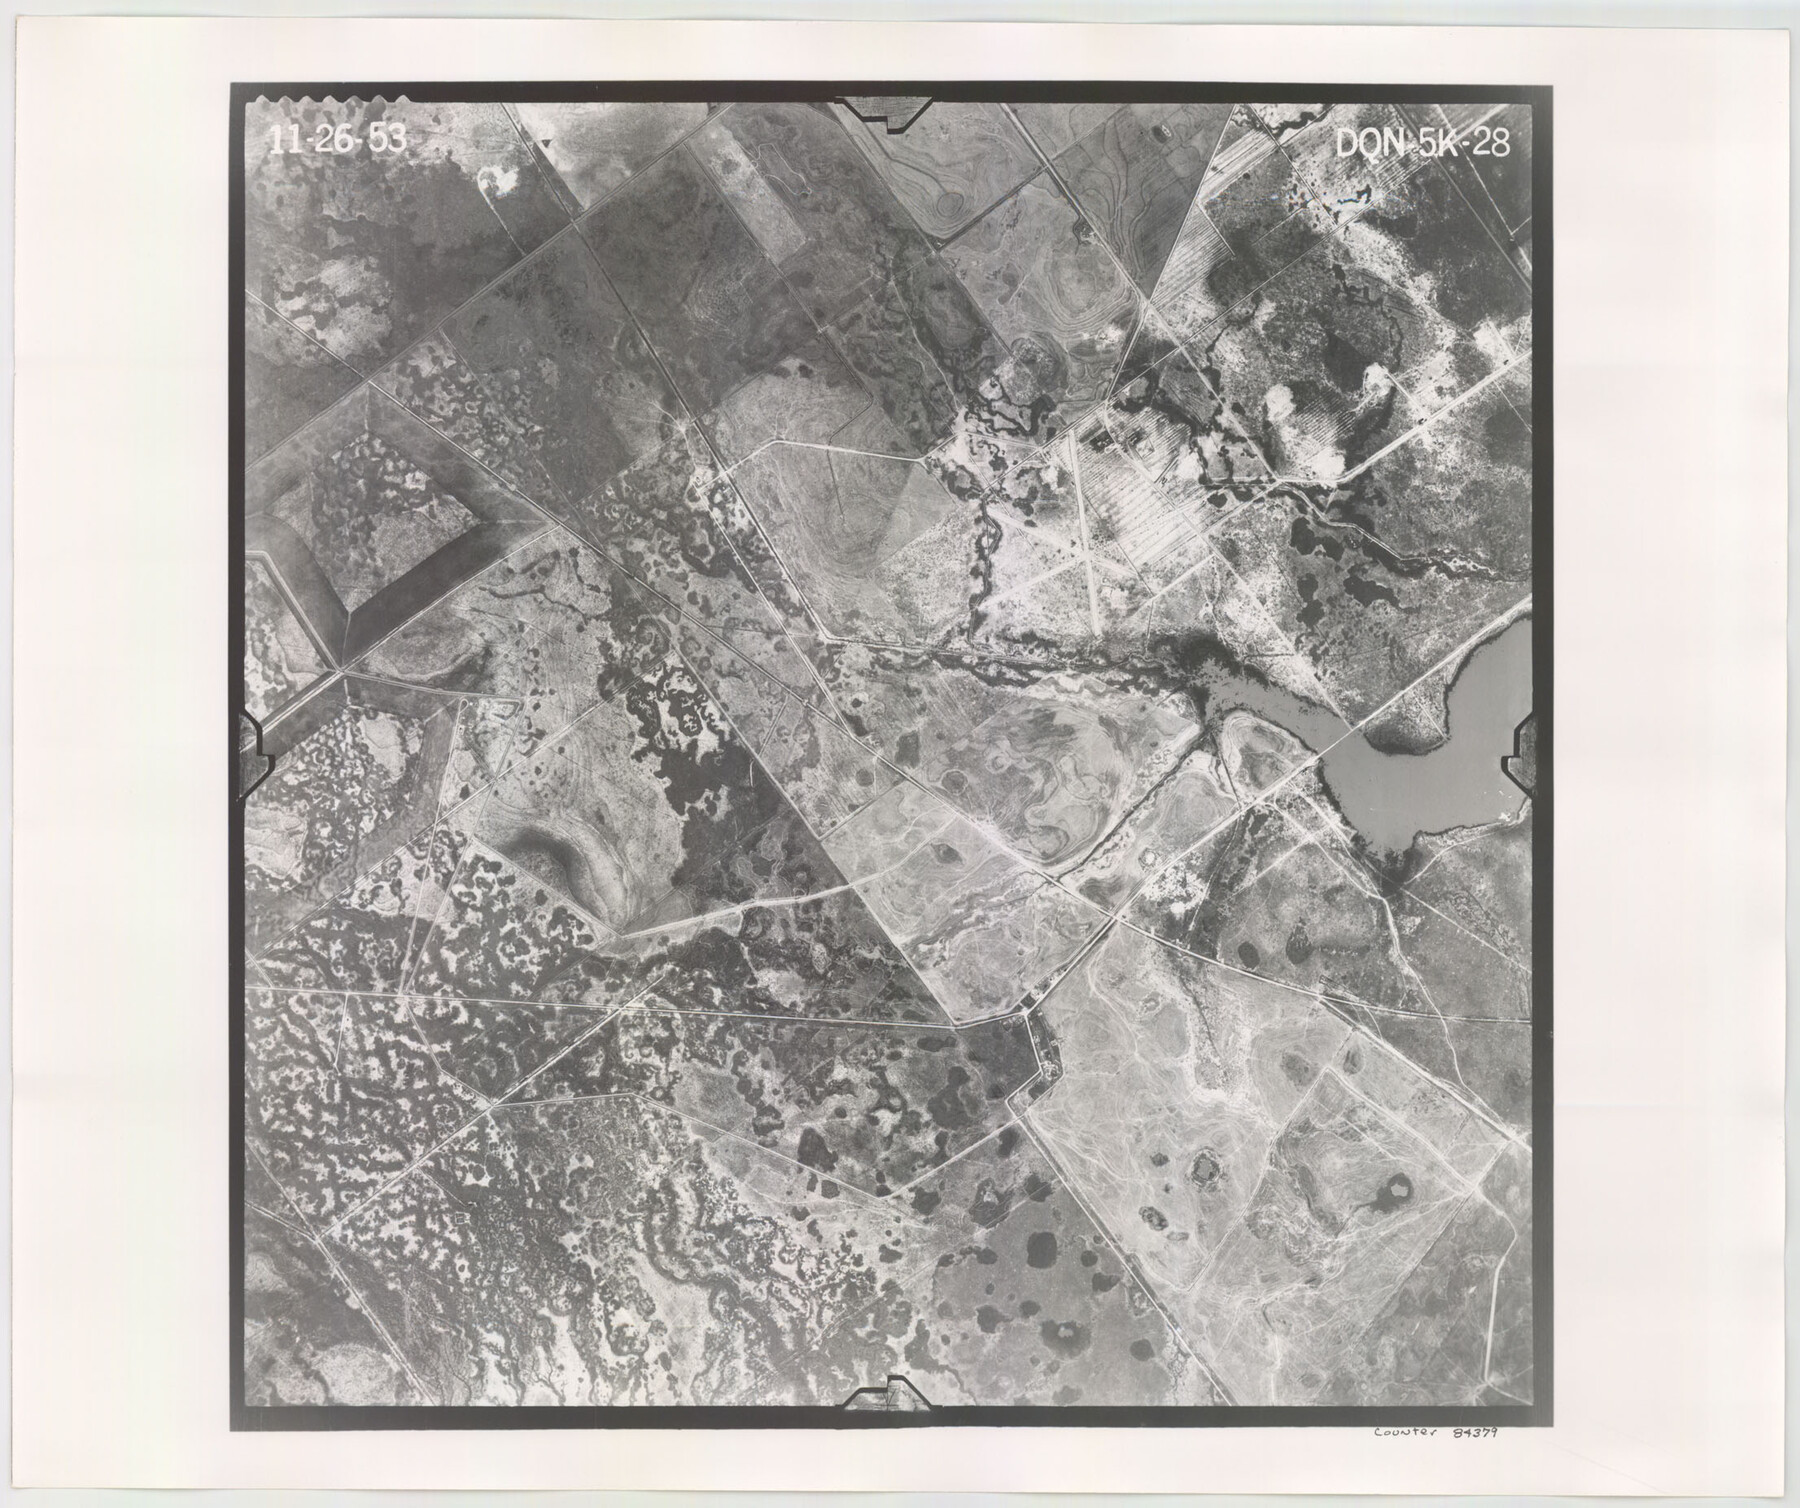 84379, Flight Mission No. DQN-5K, Frame 28, Calhoun County, General Map Collection